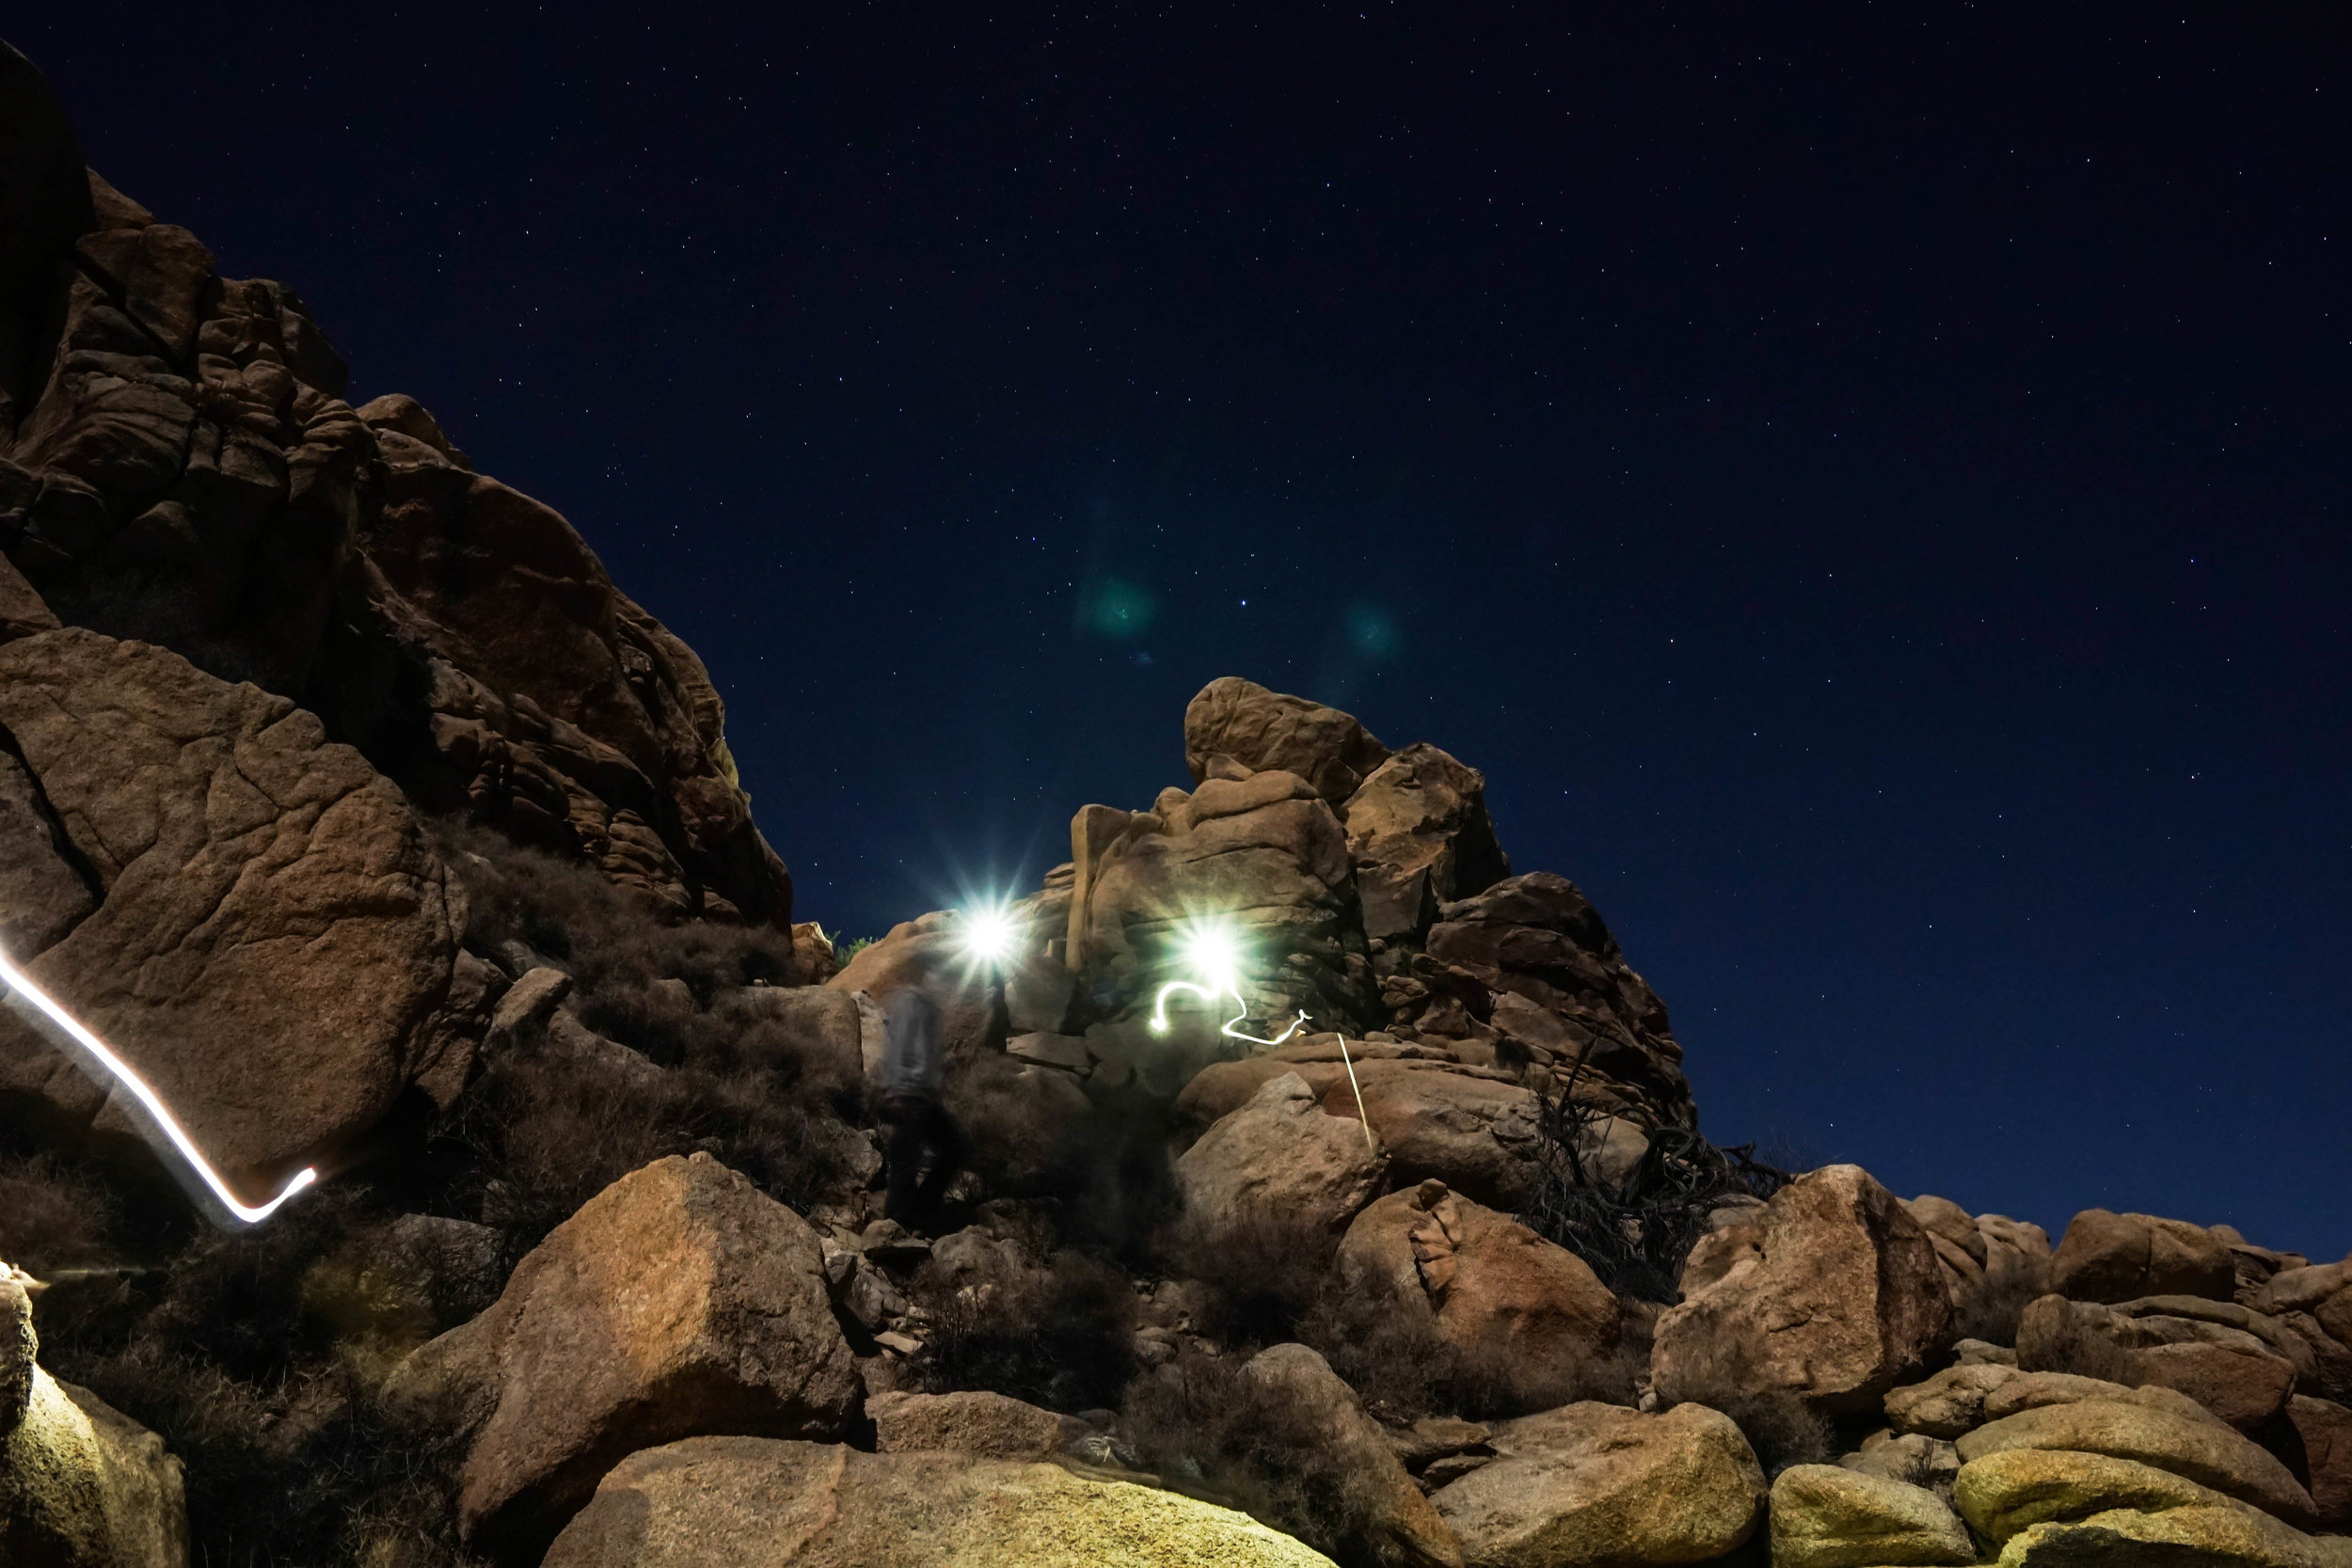 Story time leads to a night hike through the boulder fields